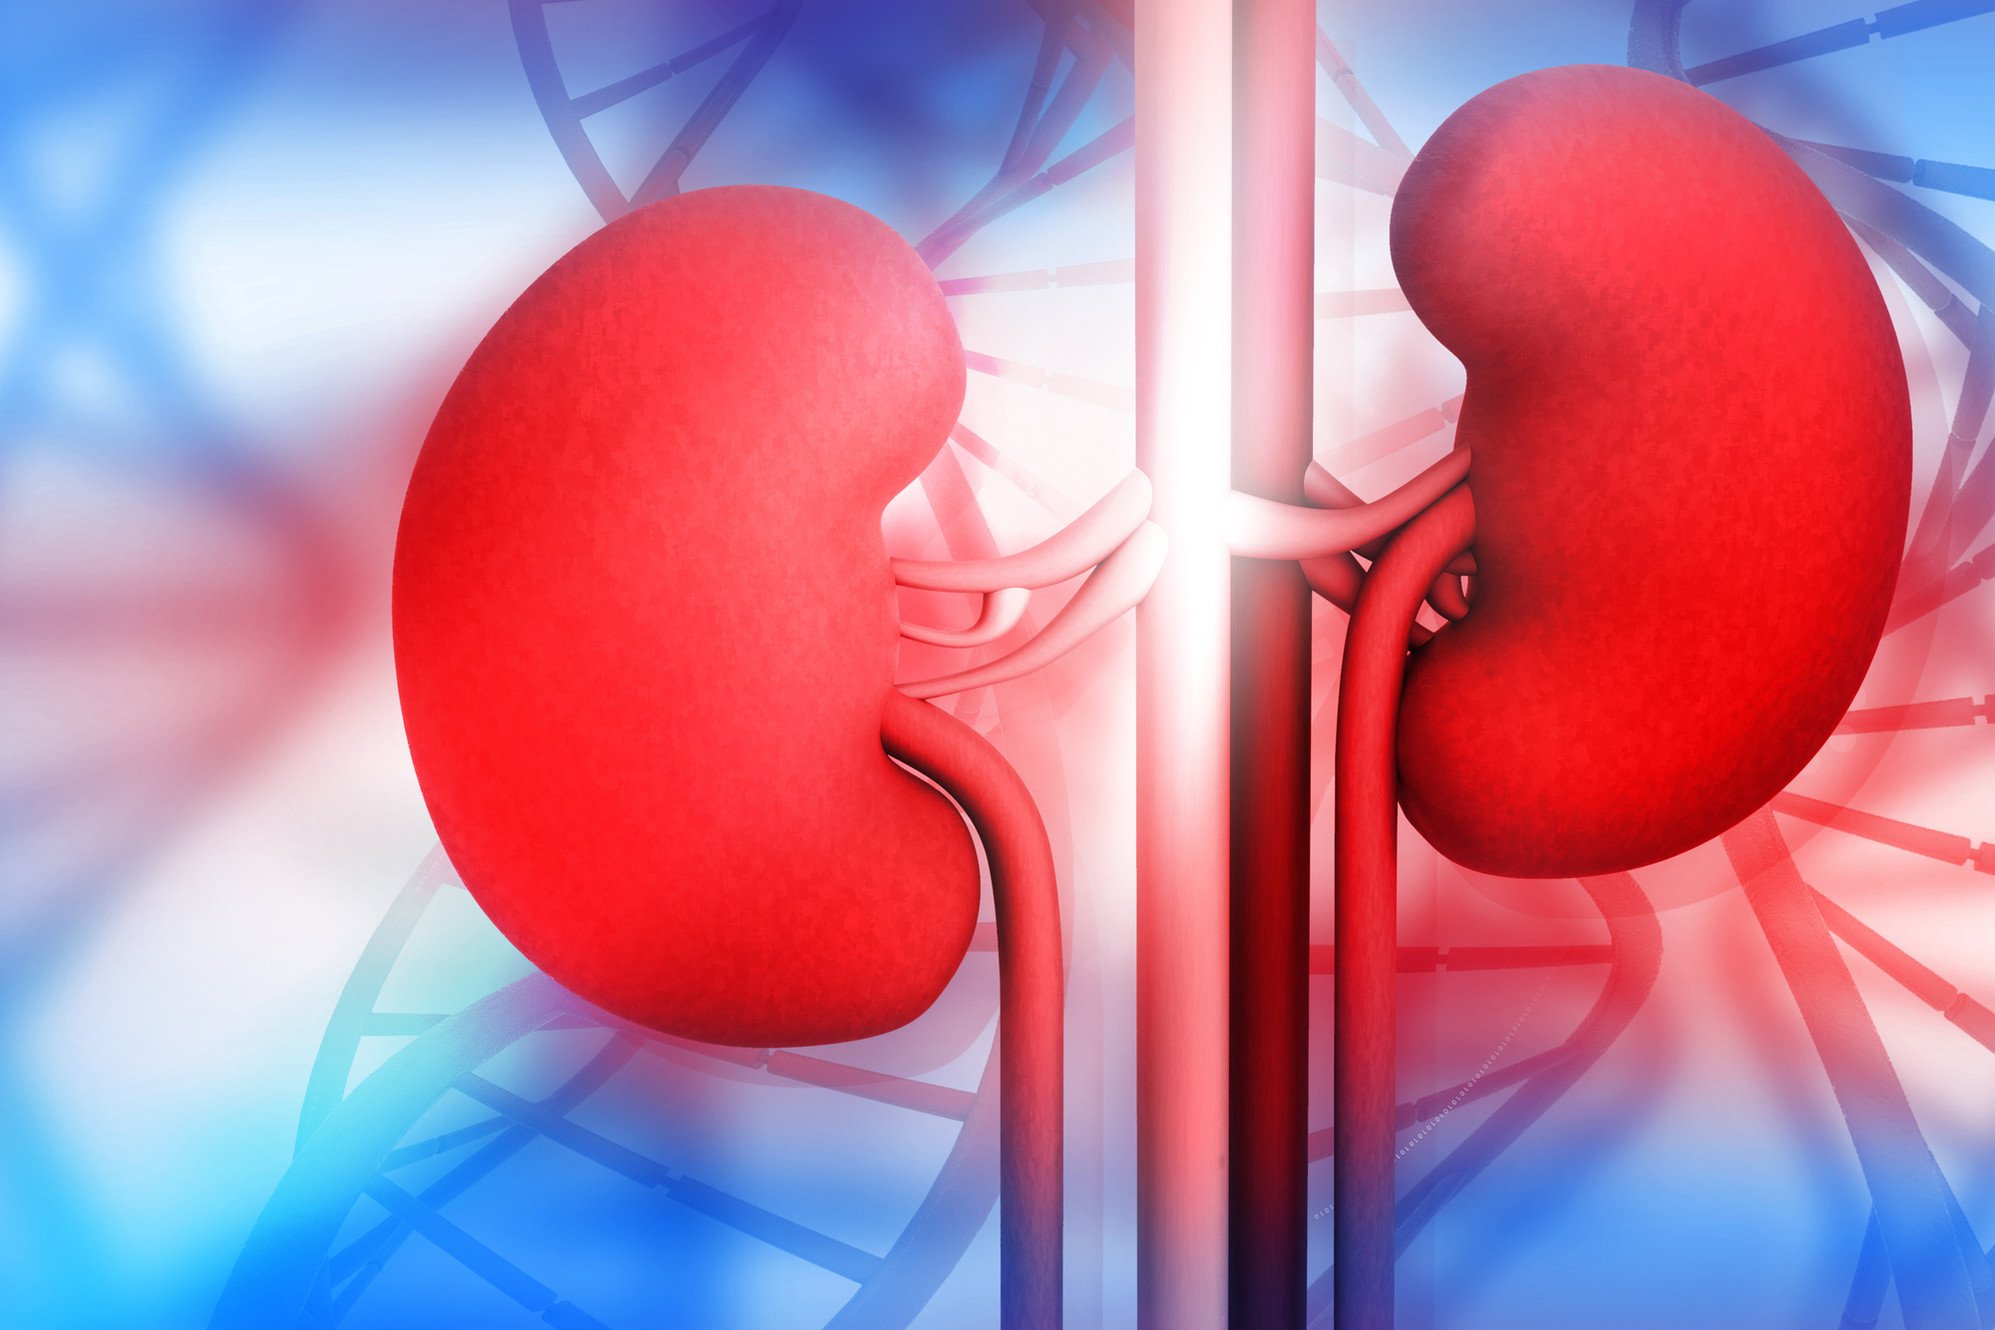 Common Questions About Kidney Disease